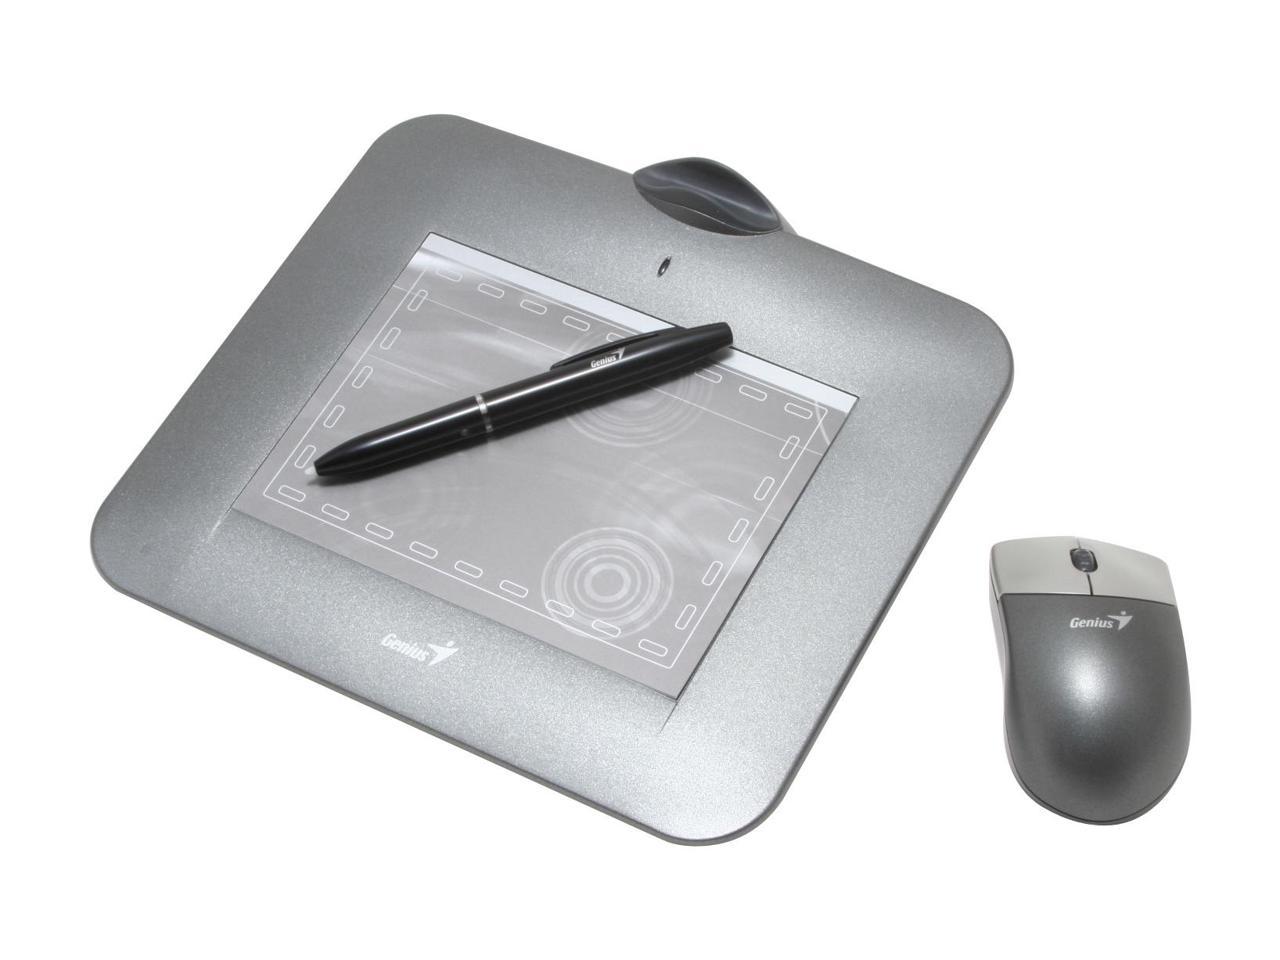 Genius G Pen 4500 Usb Tablet With Cordless Mouse And Pen Newegg Com